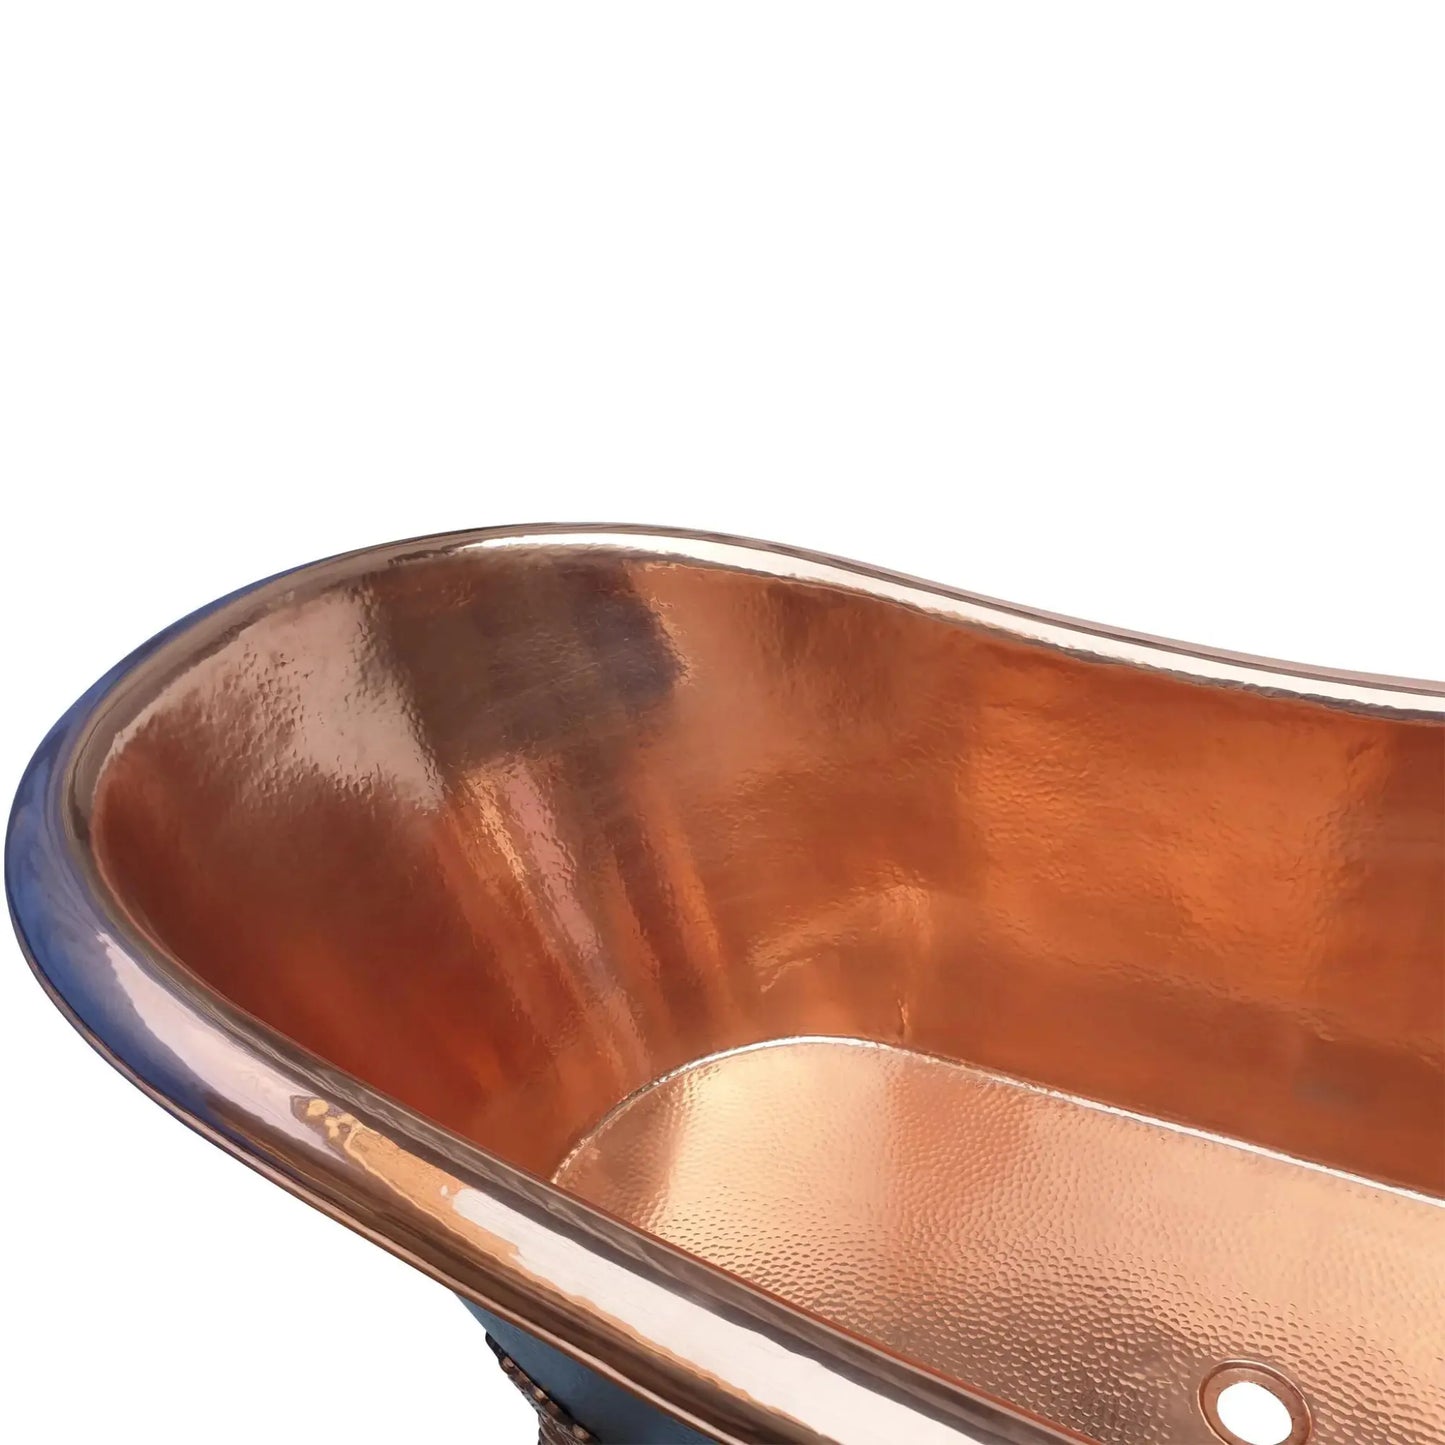 Coppersmith Creations, Hammered Clawfoot, Copper Interior & Black Exterior Bathtub, 1830 x 815mm - Beyond Bathing 